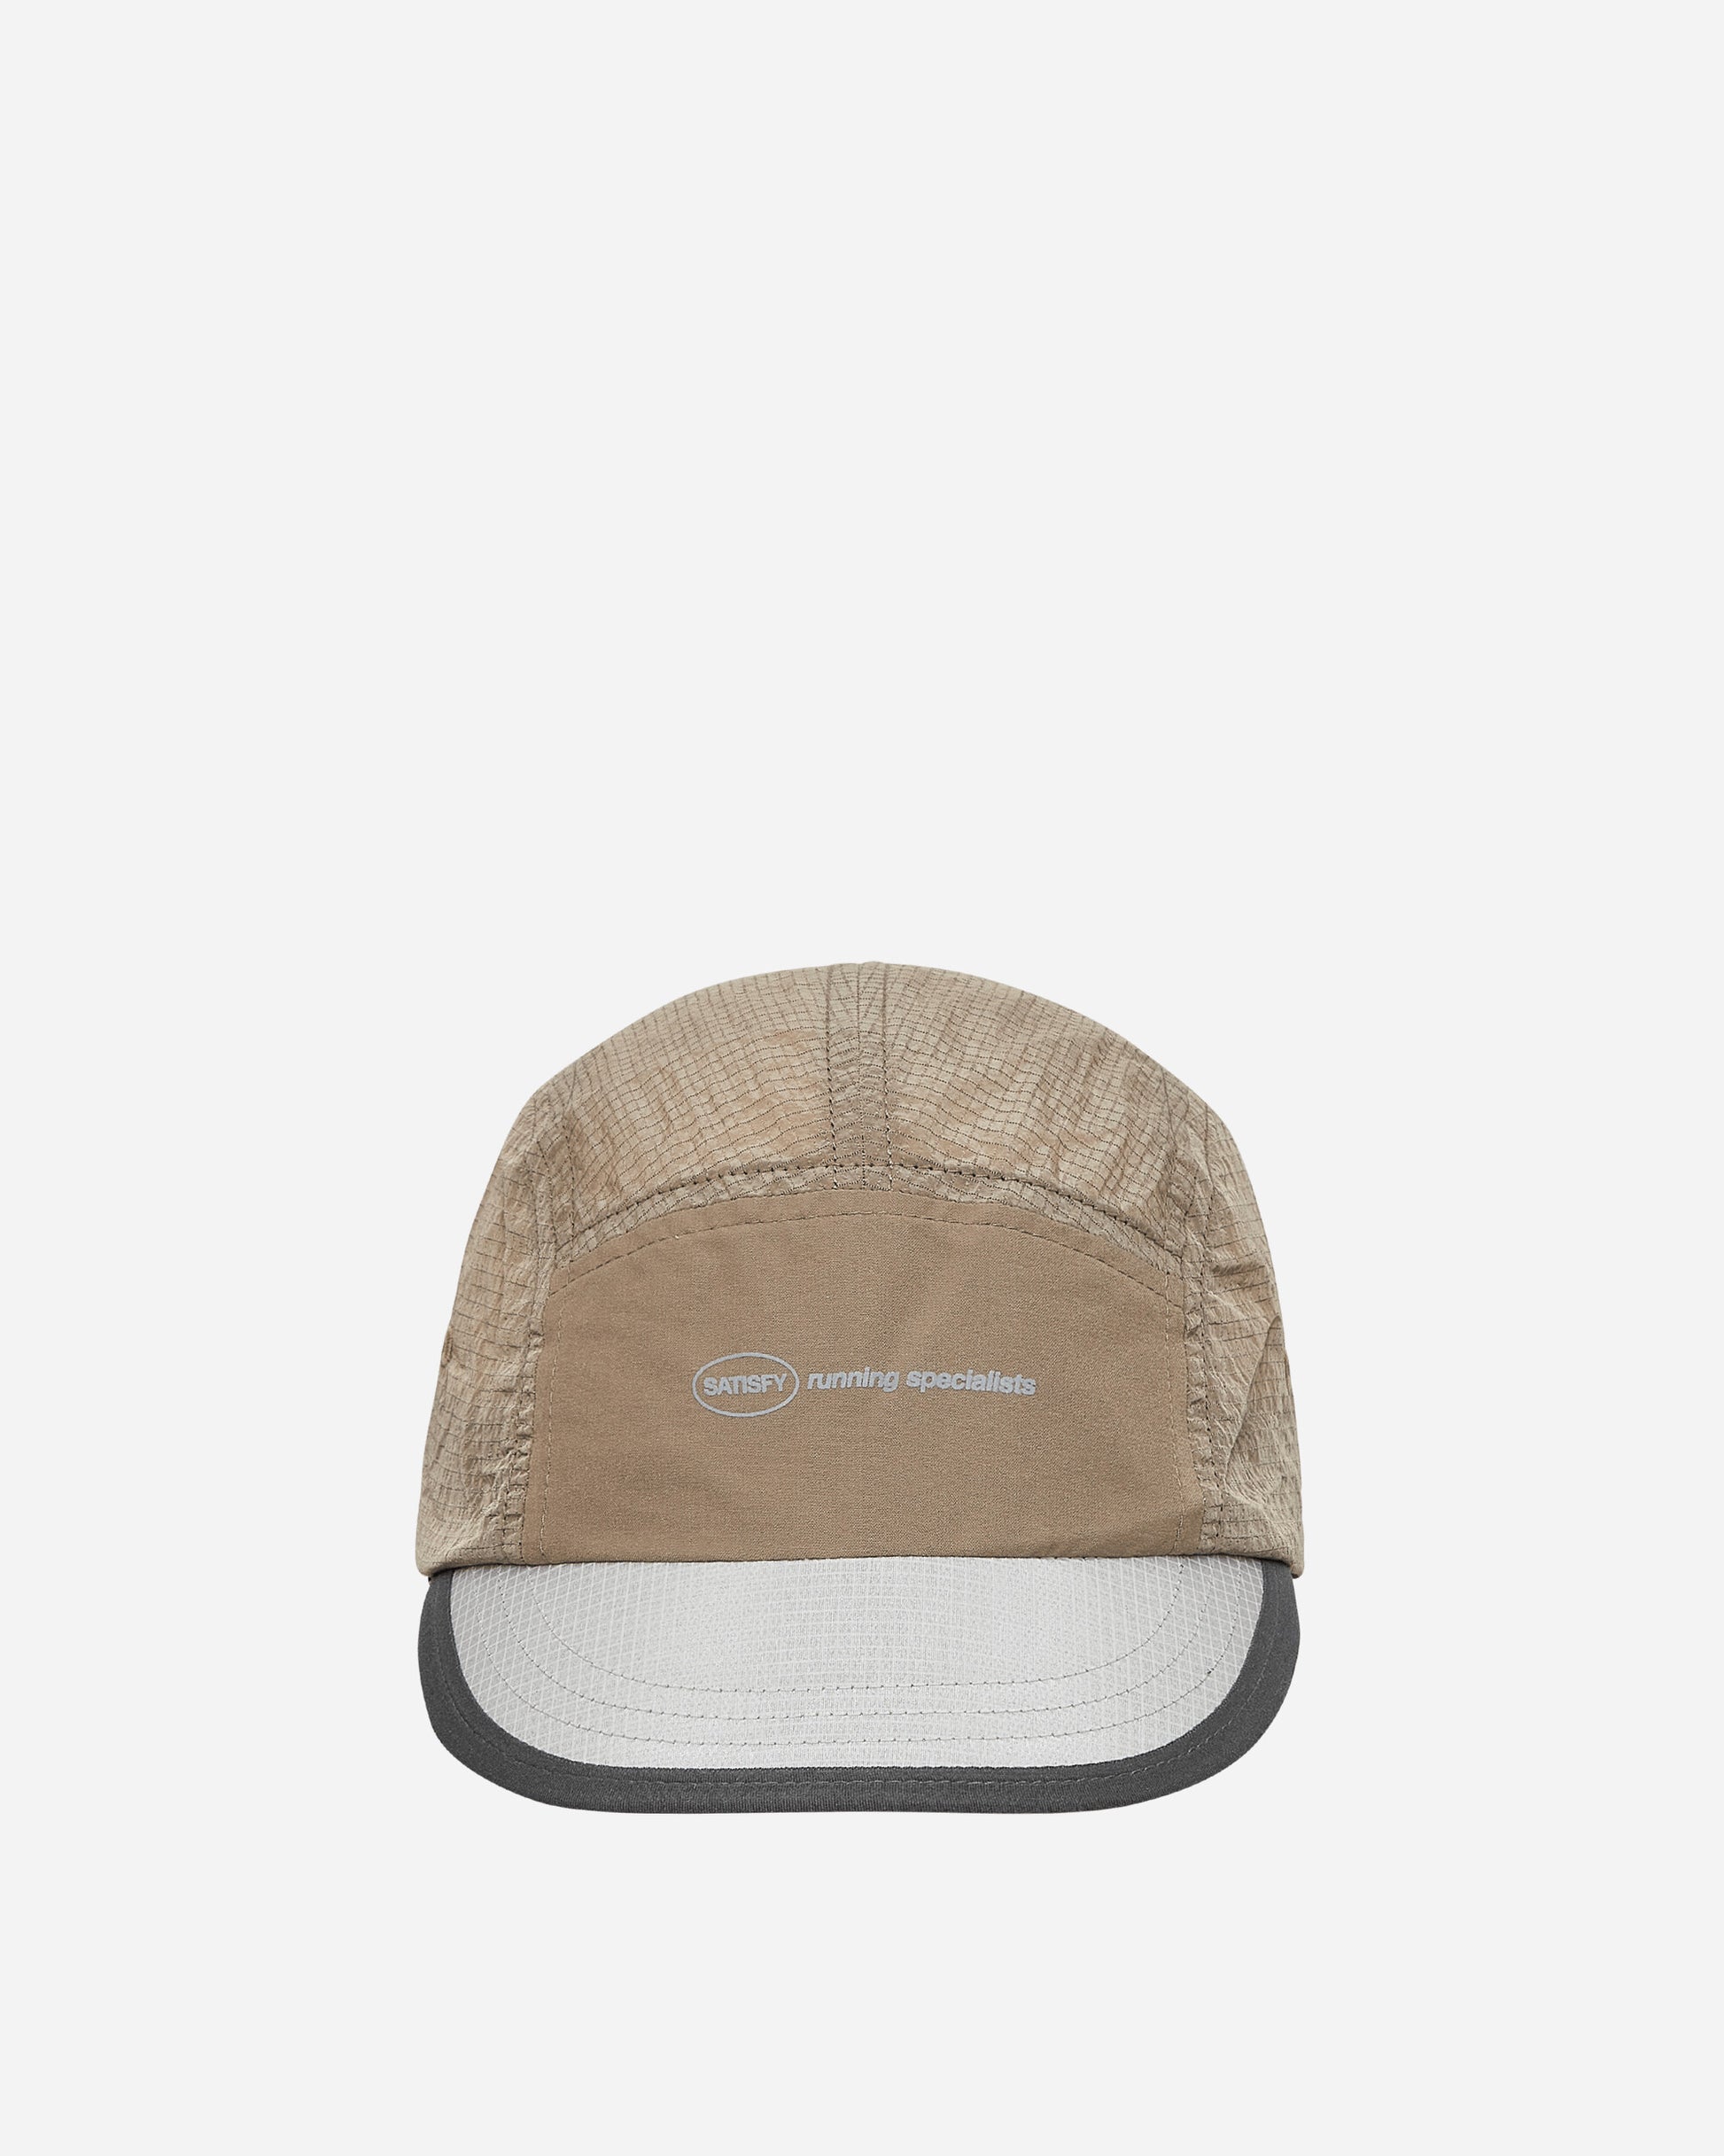 Satisfy Rippy Trail Cap Beige Hats Caps 5113 BE-RS